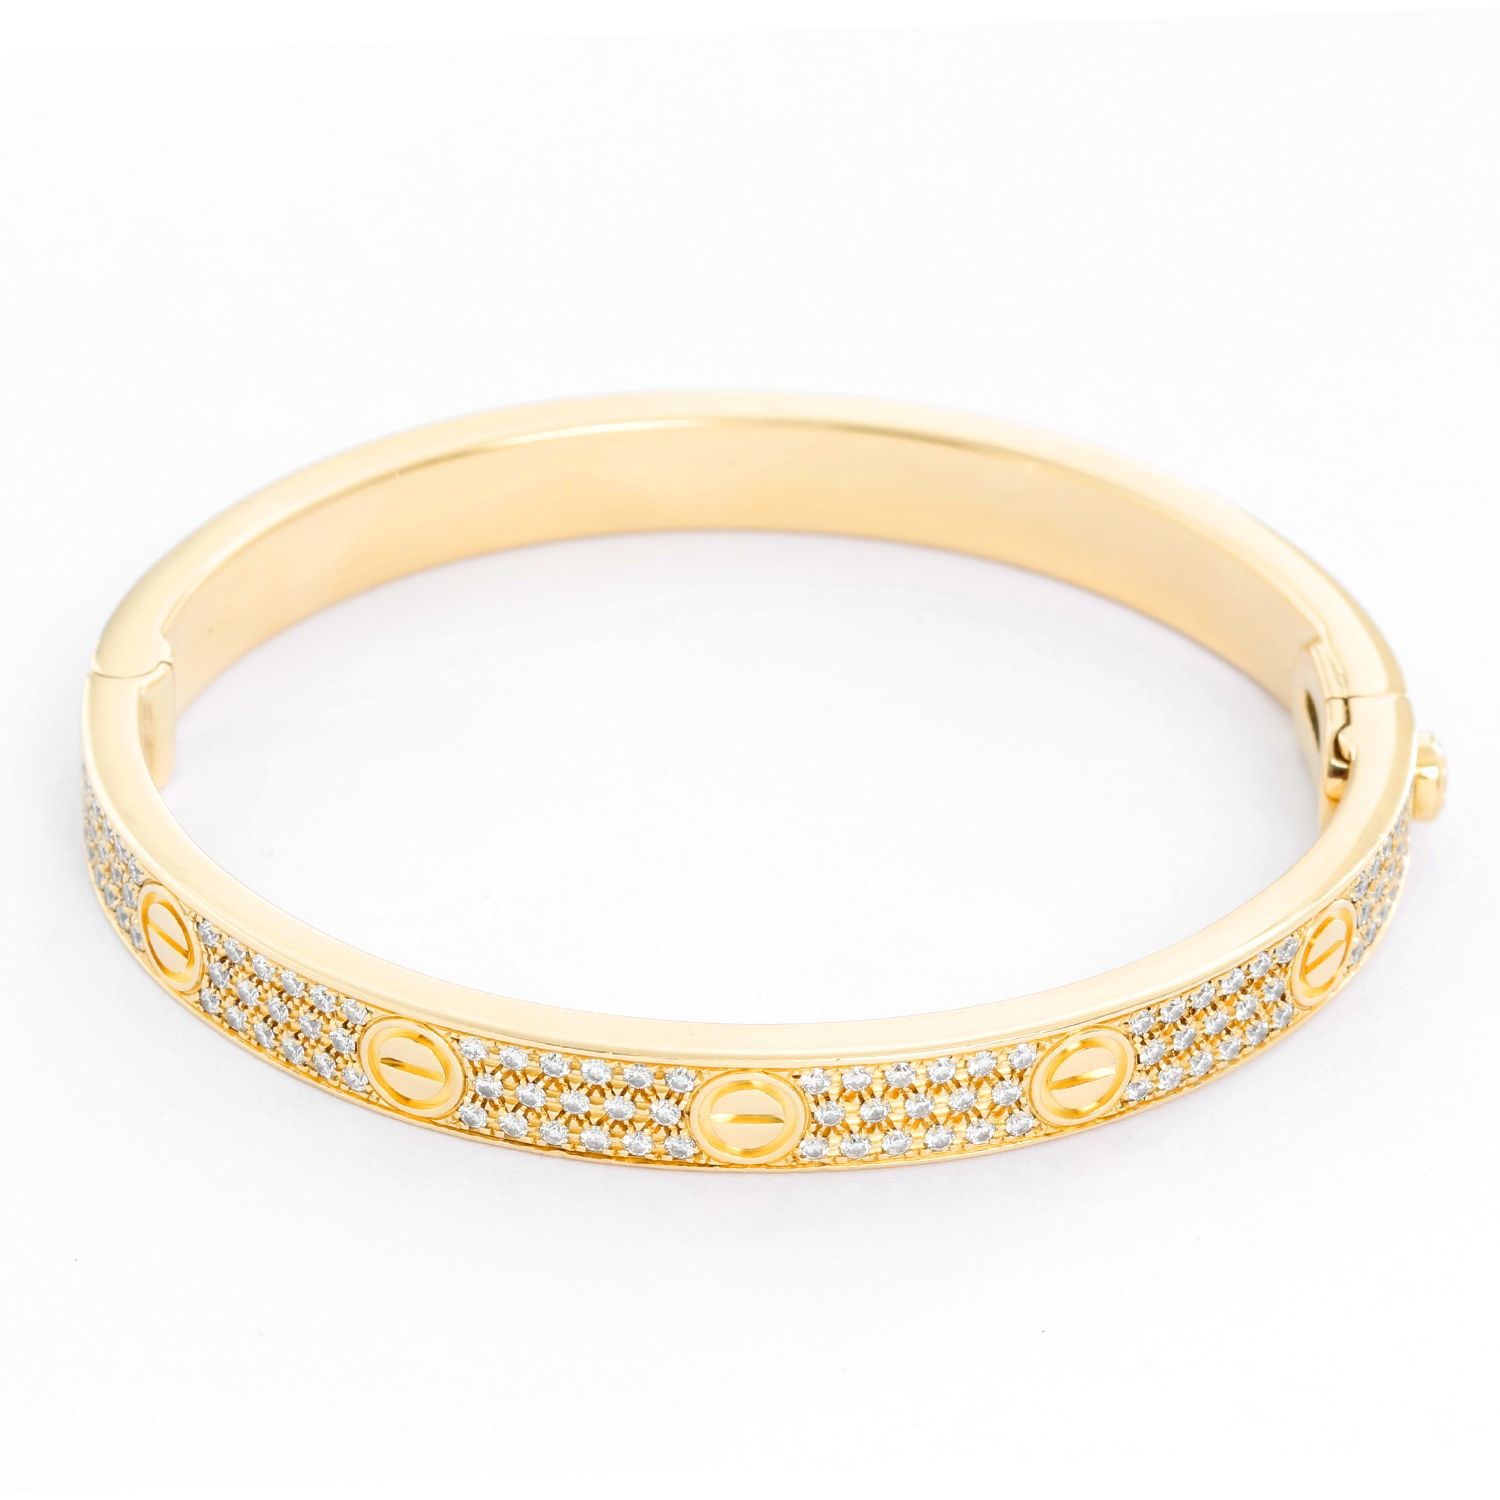 CRB6077017 - LOVE bracelet - Yellow gold, brushed finish - Cartier